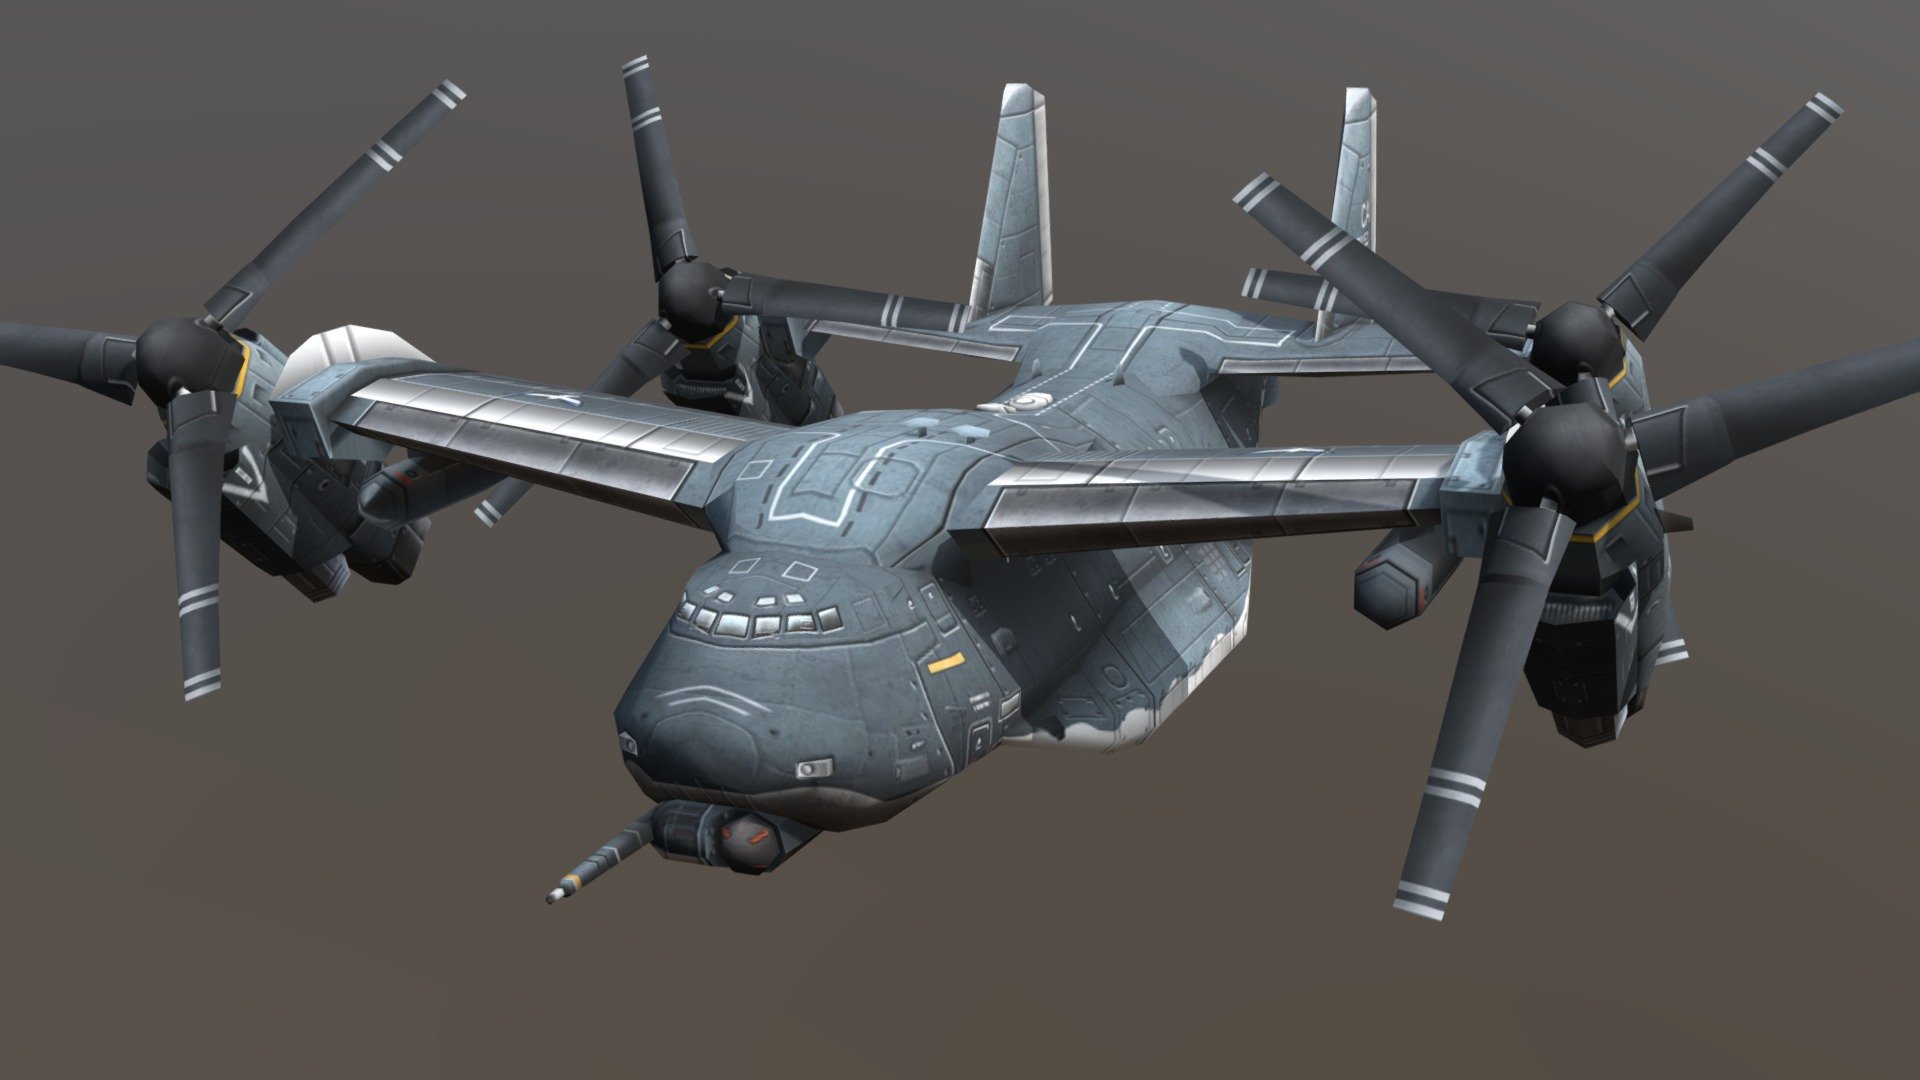 USA - Starlifter
Rise of the Reds ingame model
design - modeling - texturing

If you never played this wonderfull CnC Generals mod, you should! https://www.moddb.com/mods/rise-of-the-reds - Starlifter - 3D model by Ingram Schell (@ingraban) 3d model